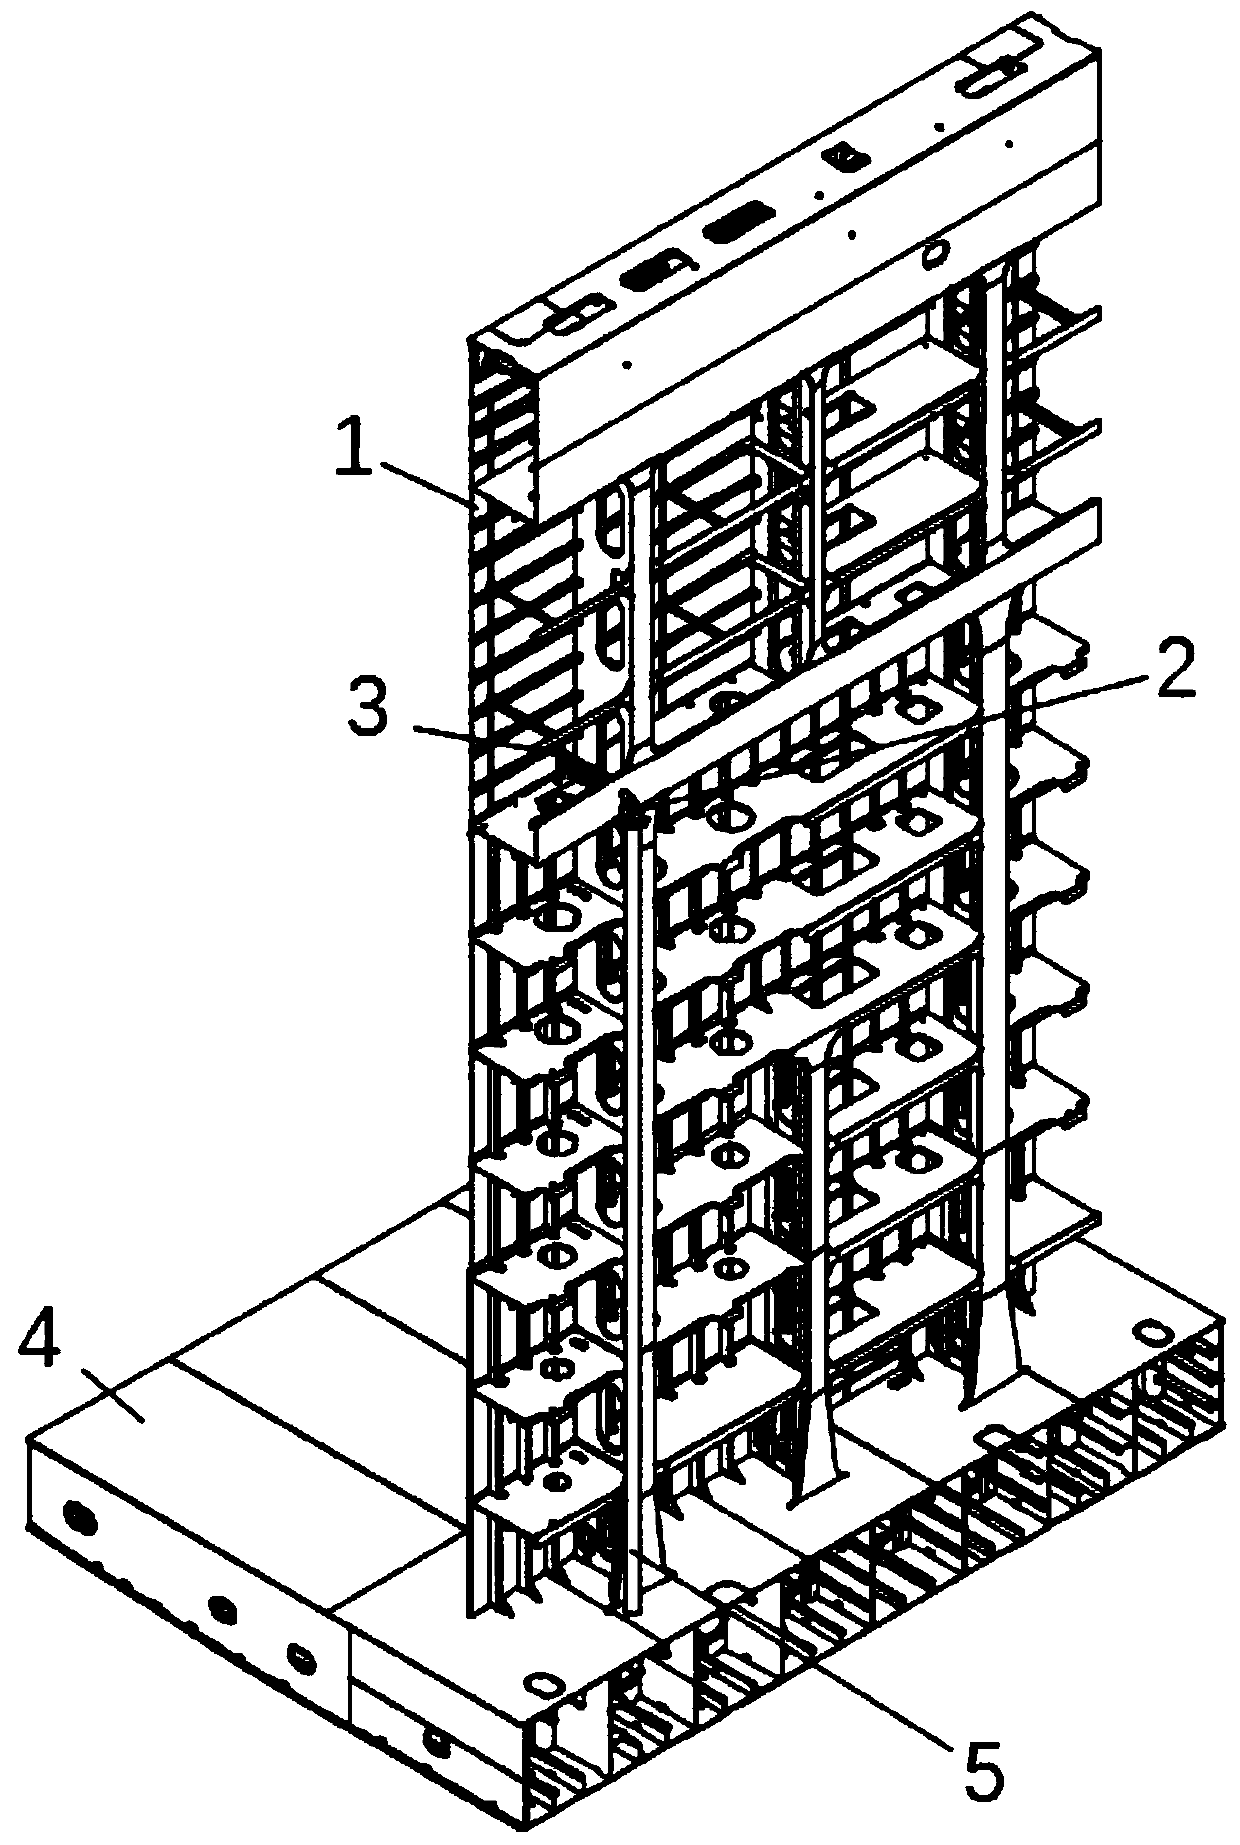 Auxiliary carrying structure for transverse bulkhead of ultra-large container ship